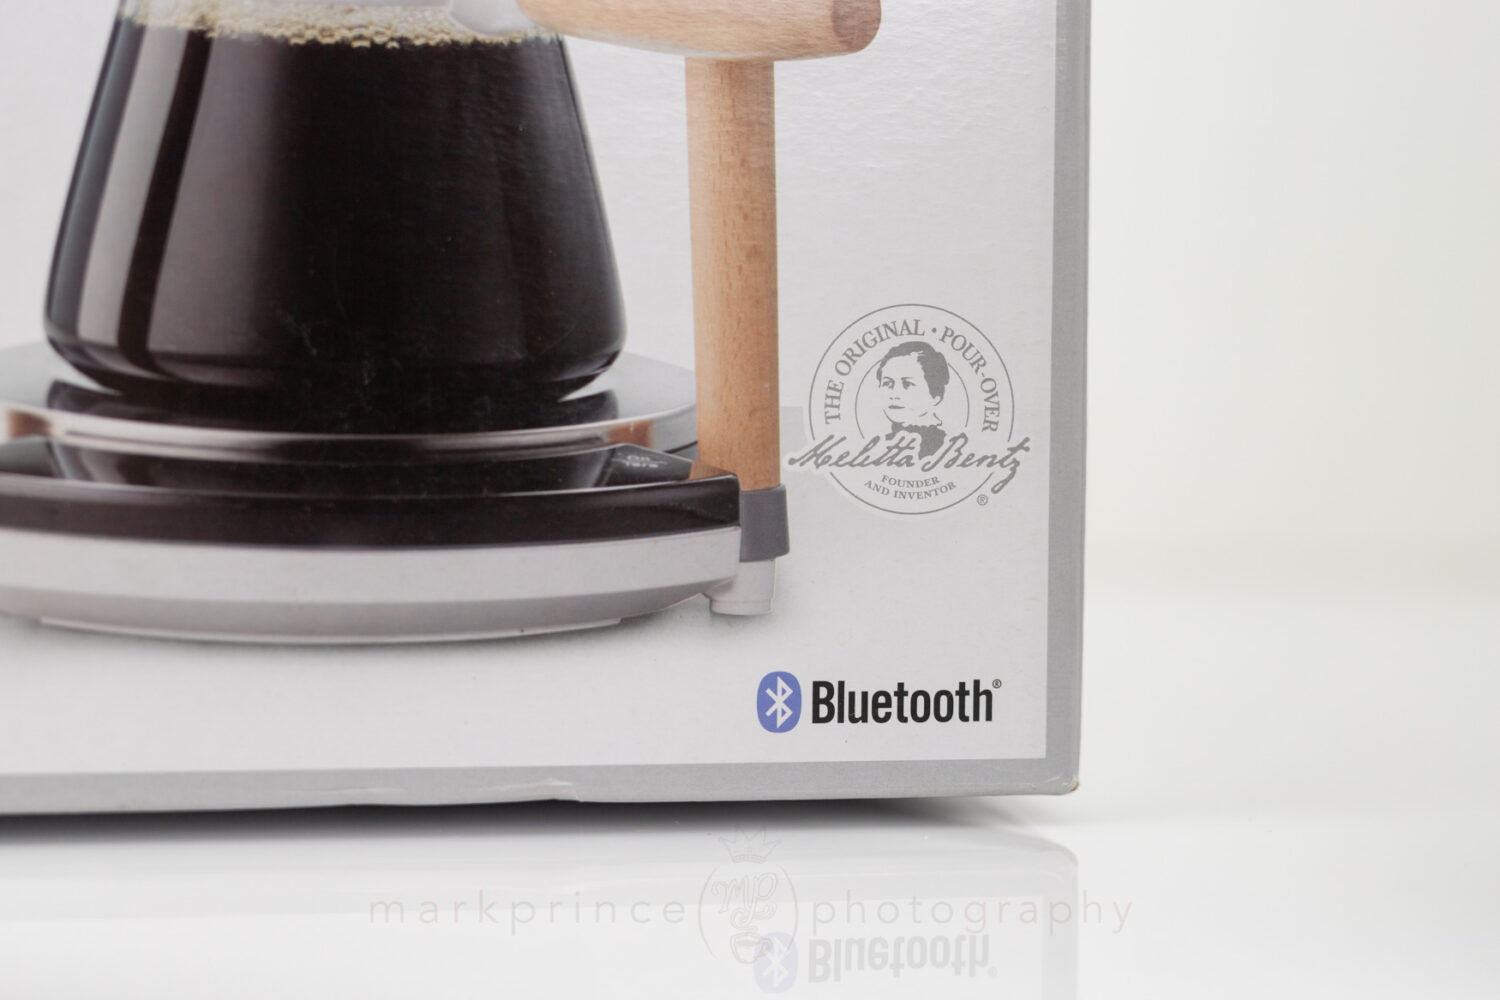 Only the "Connected" version of the Melitta Senz V has Bluetooth and control via an app.